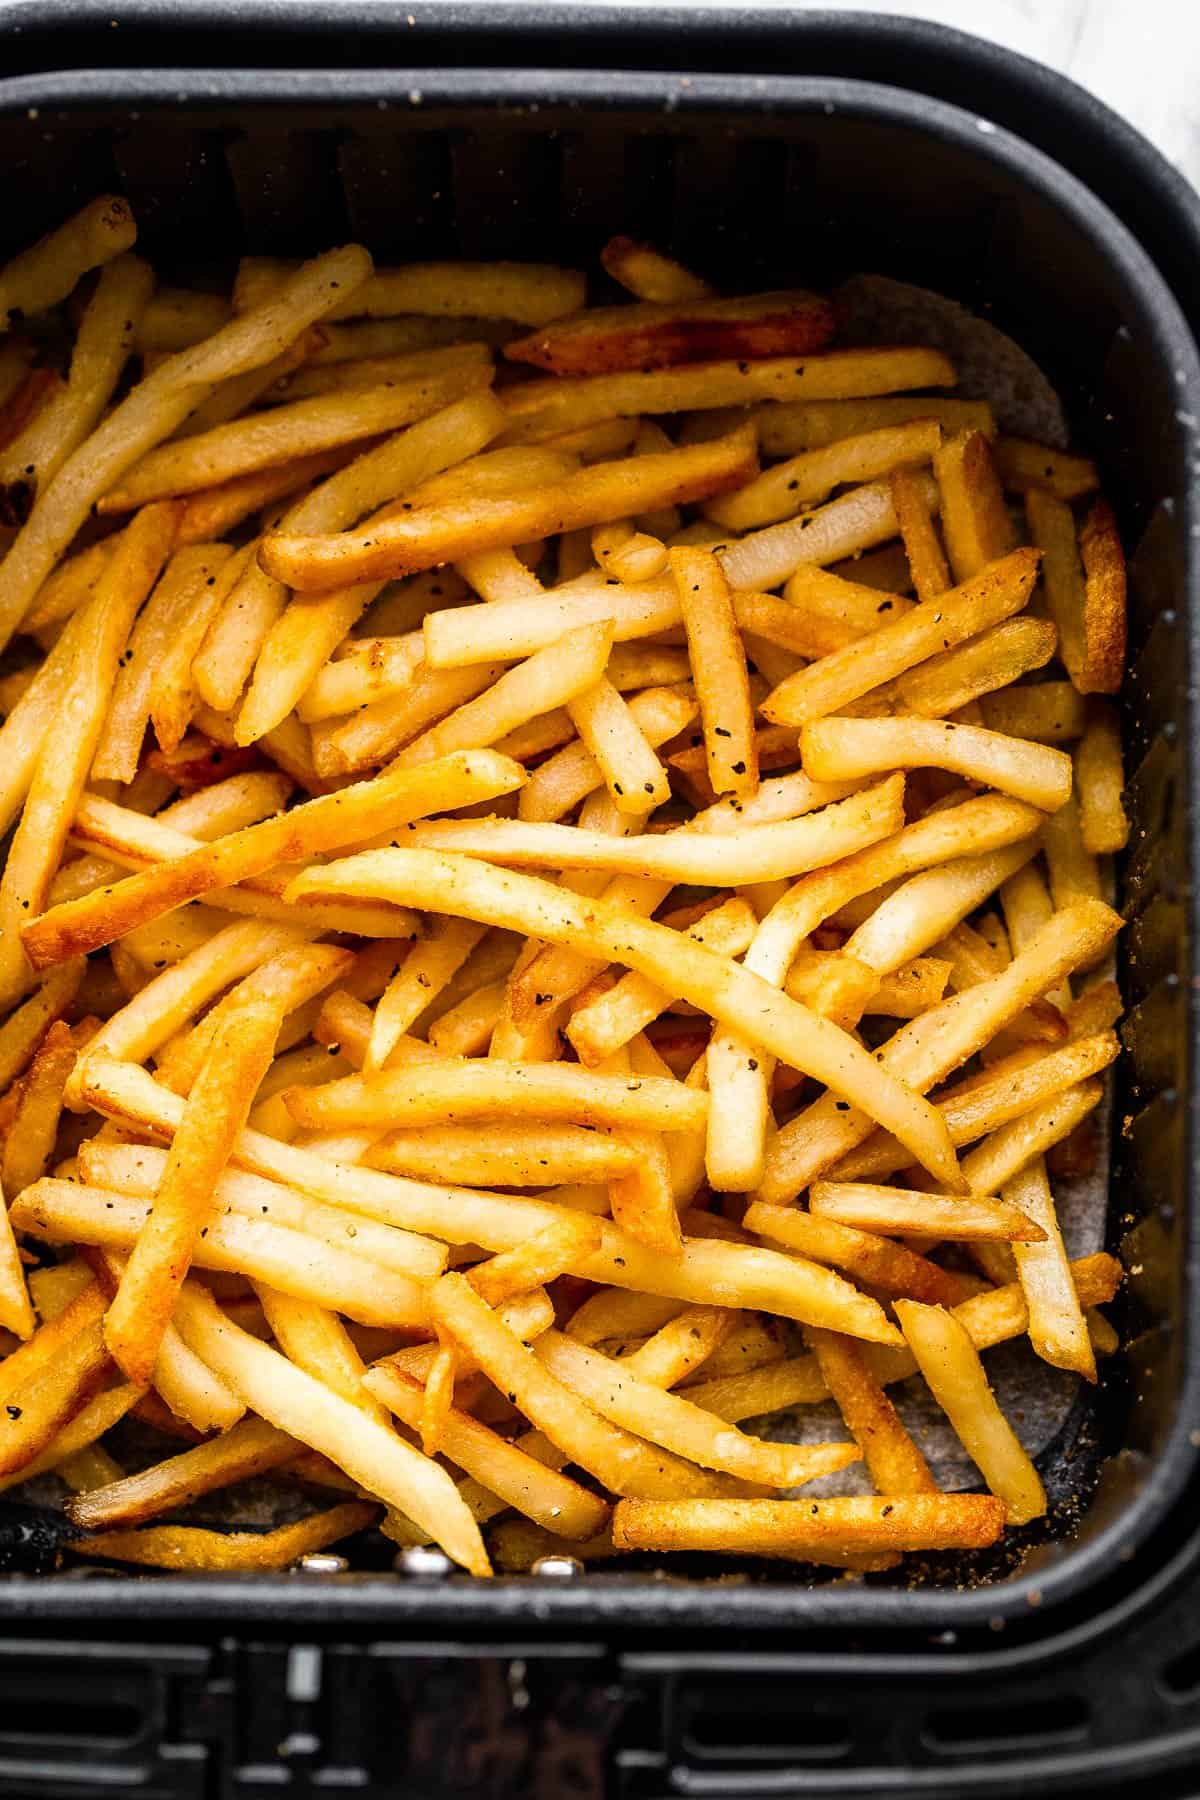 Frozen Fries in Air Fryer Time: Crispy Perfection in 20 Minutes